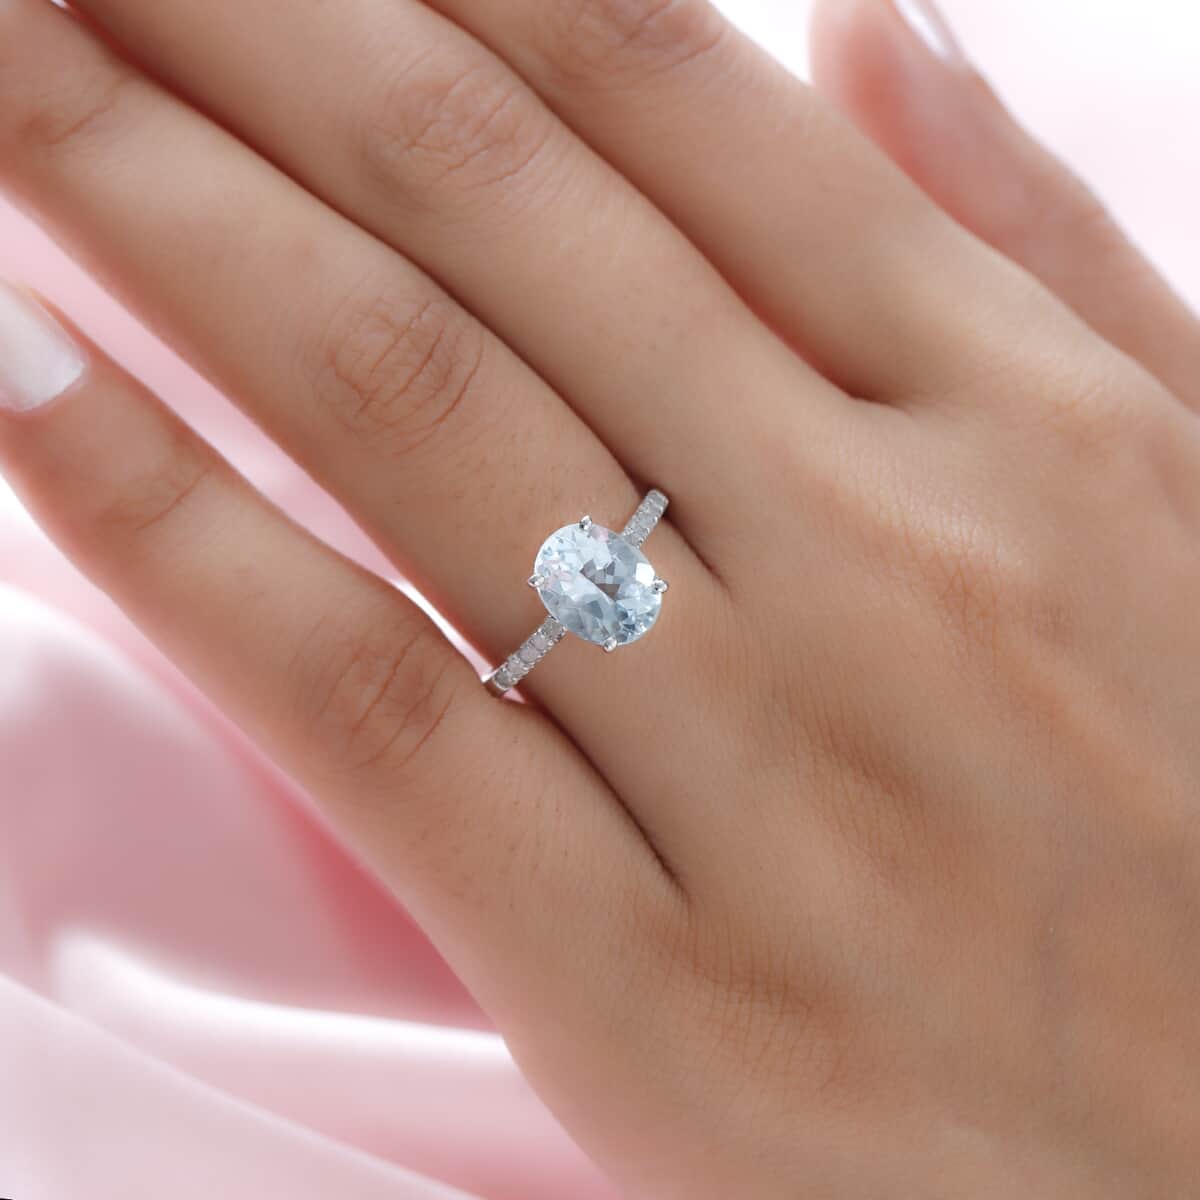 Premium Mangoro Aquamarine, Diamond Ring in Platinum Over Sterling Silver,Promise Rings For Her,Silver Fancy Ring 2.35 ctw (Size 10.0) image number 2